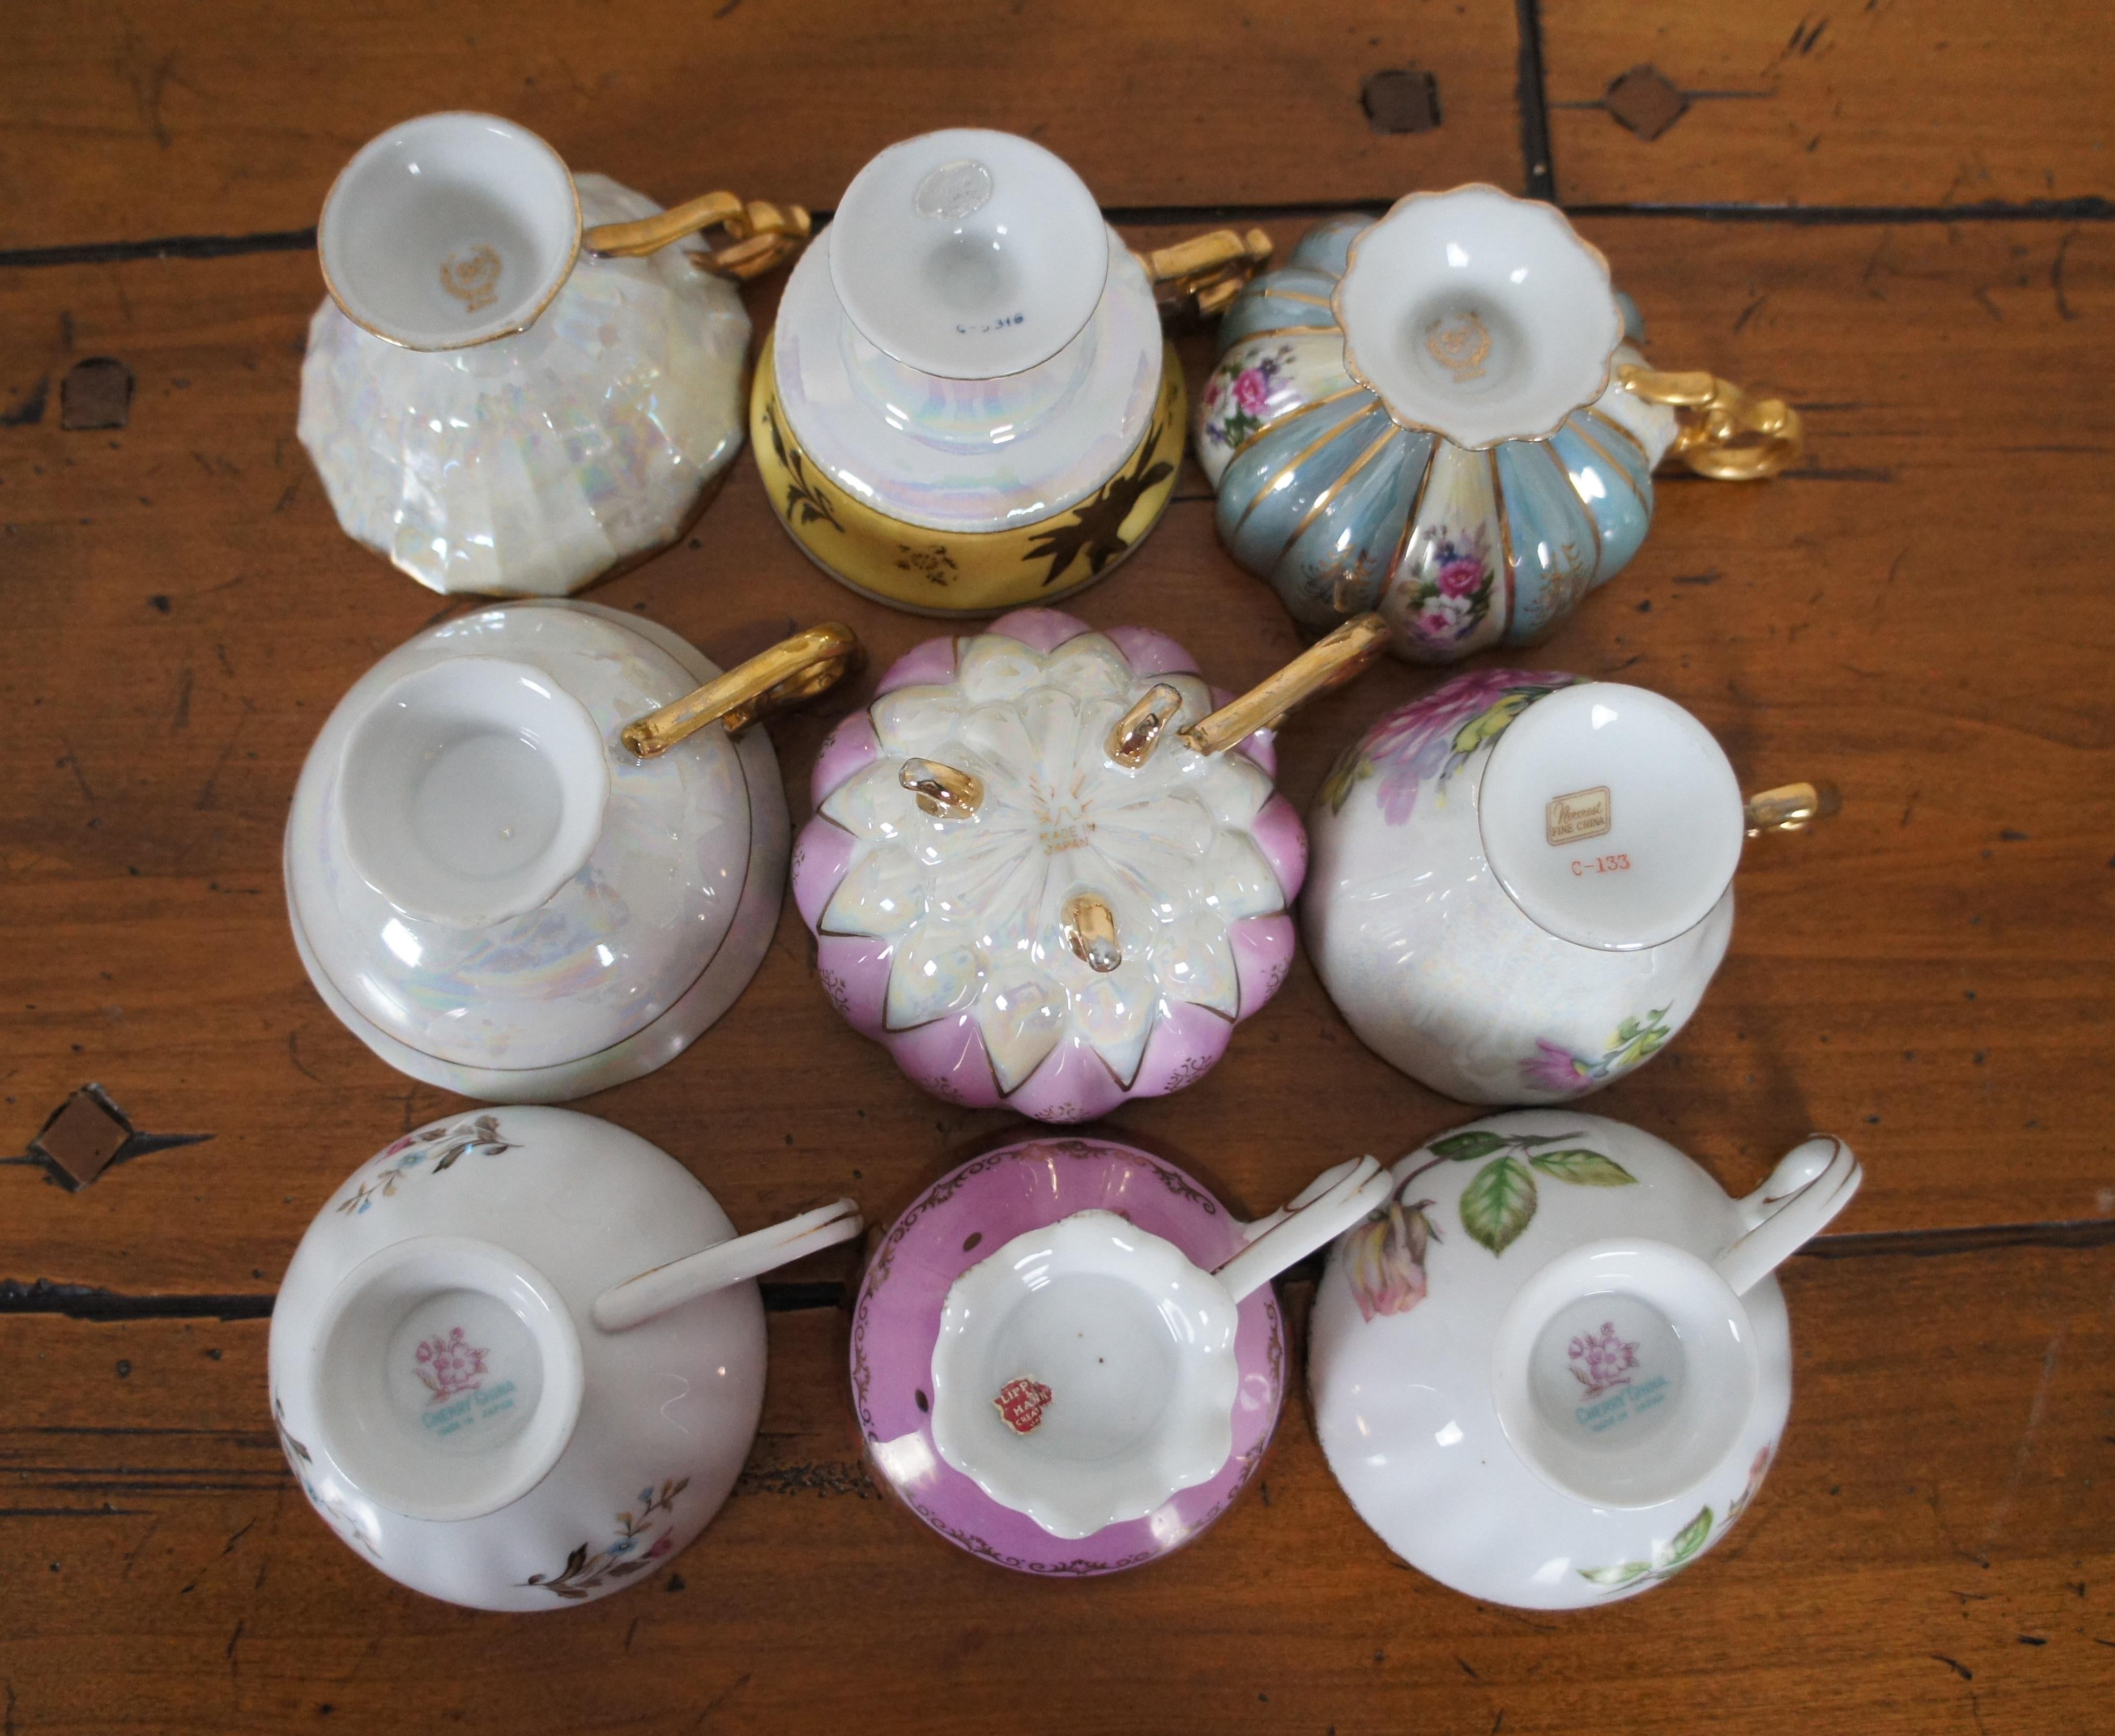 Lot of 9 Antique & Vintage Porcelain Teacups & Saucers Hand Painted Reticulated 3